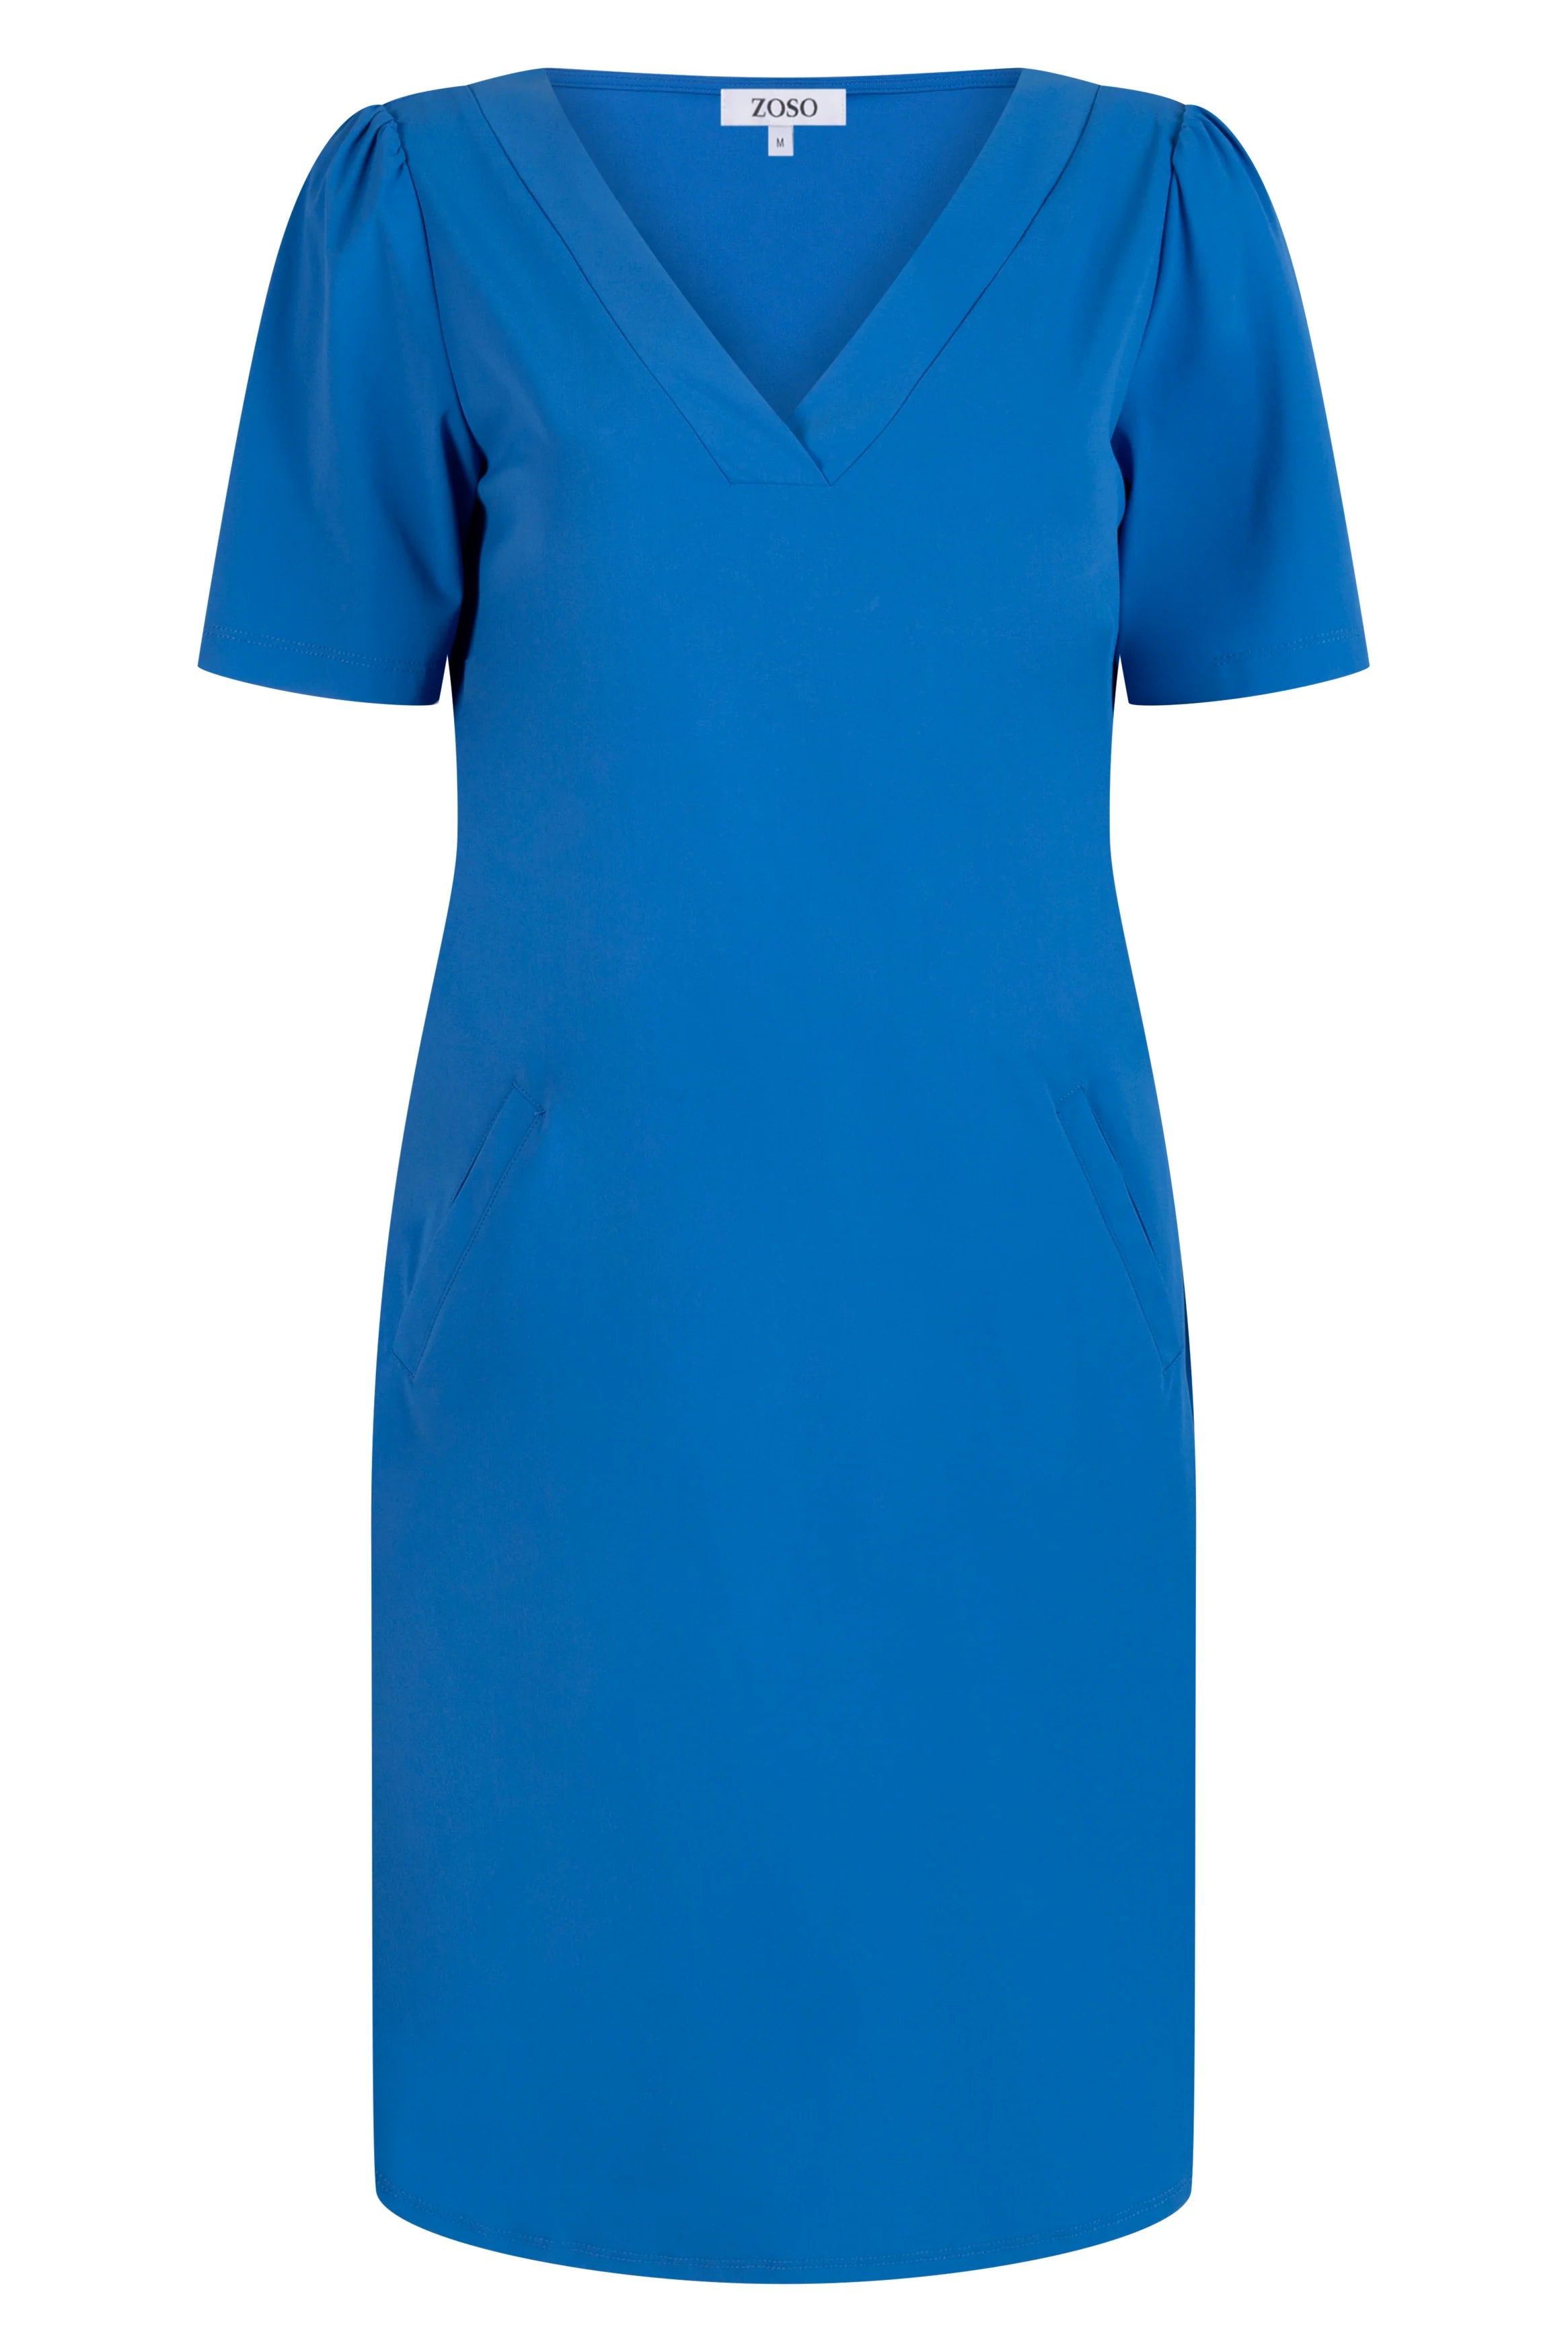 Juulz Travel Dress in Strong Blue